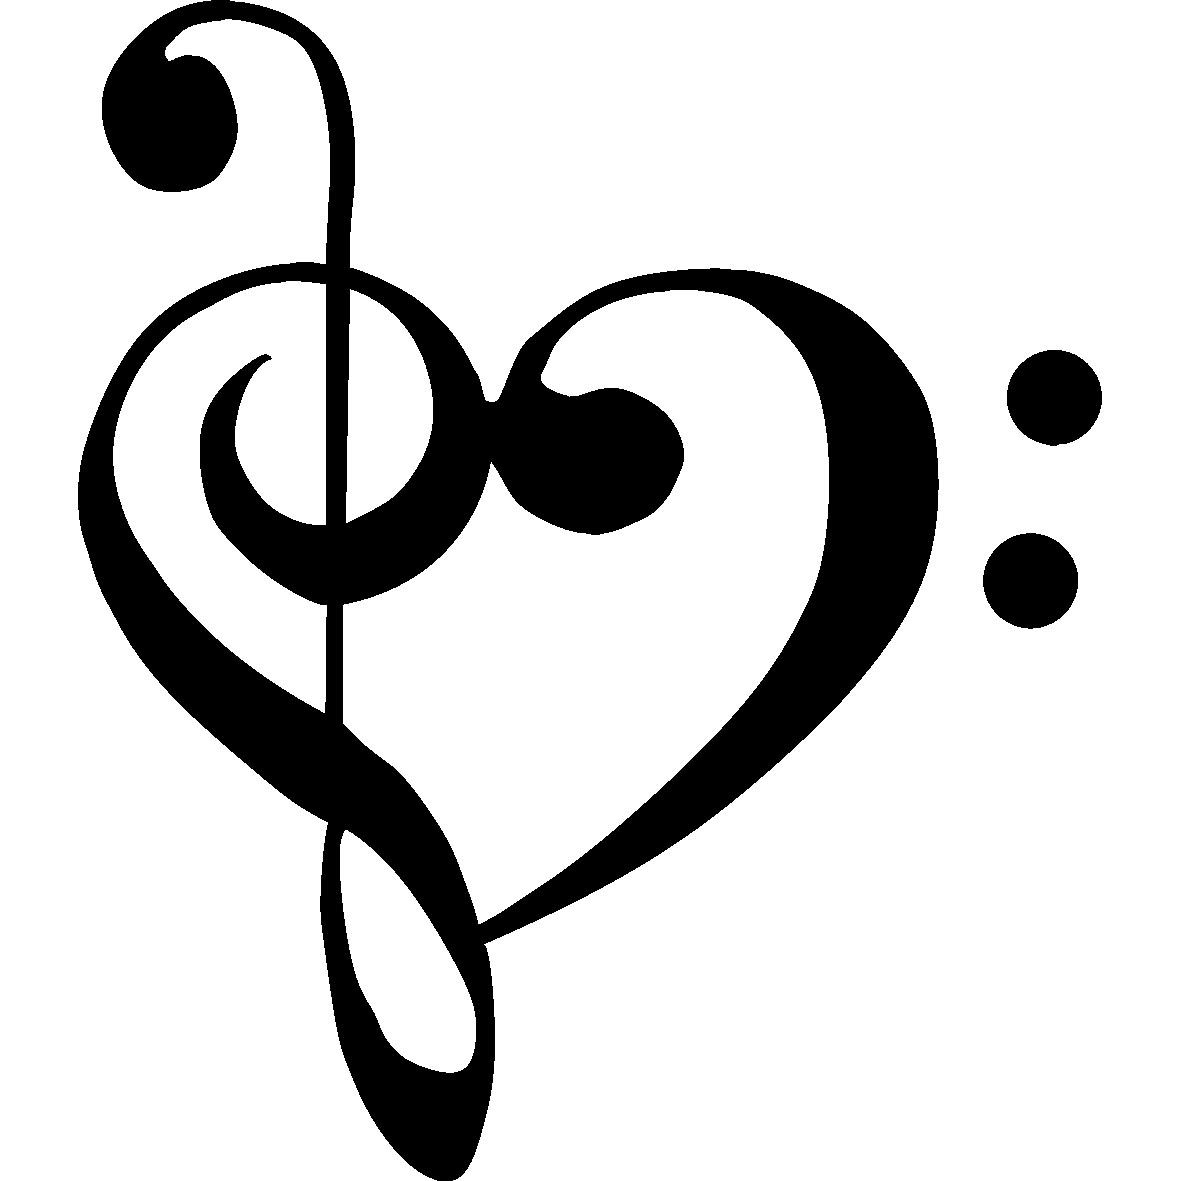 Treble Clef and Base Clef Heart❤❤❤❤